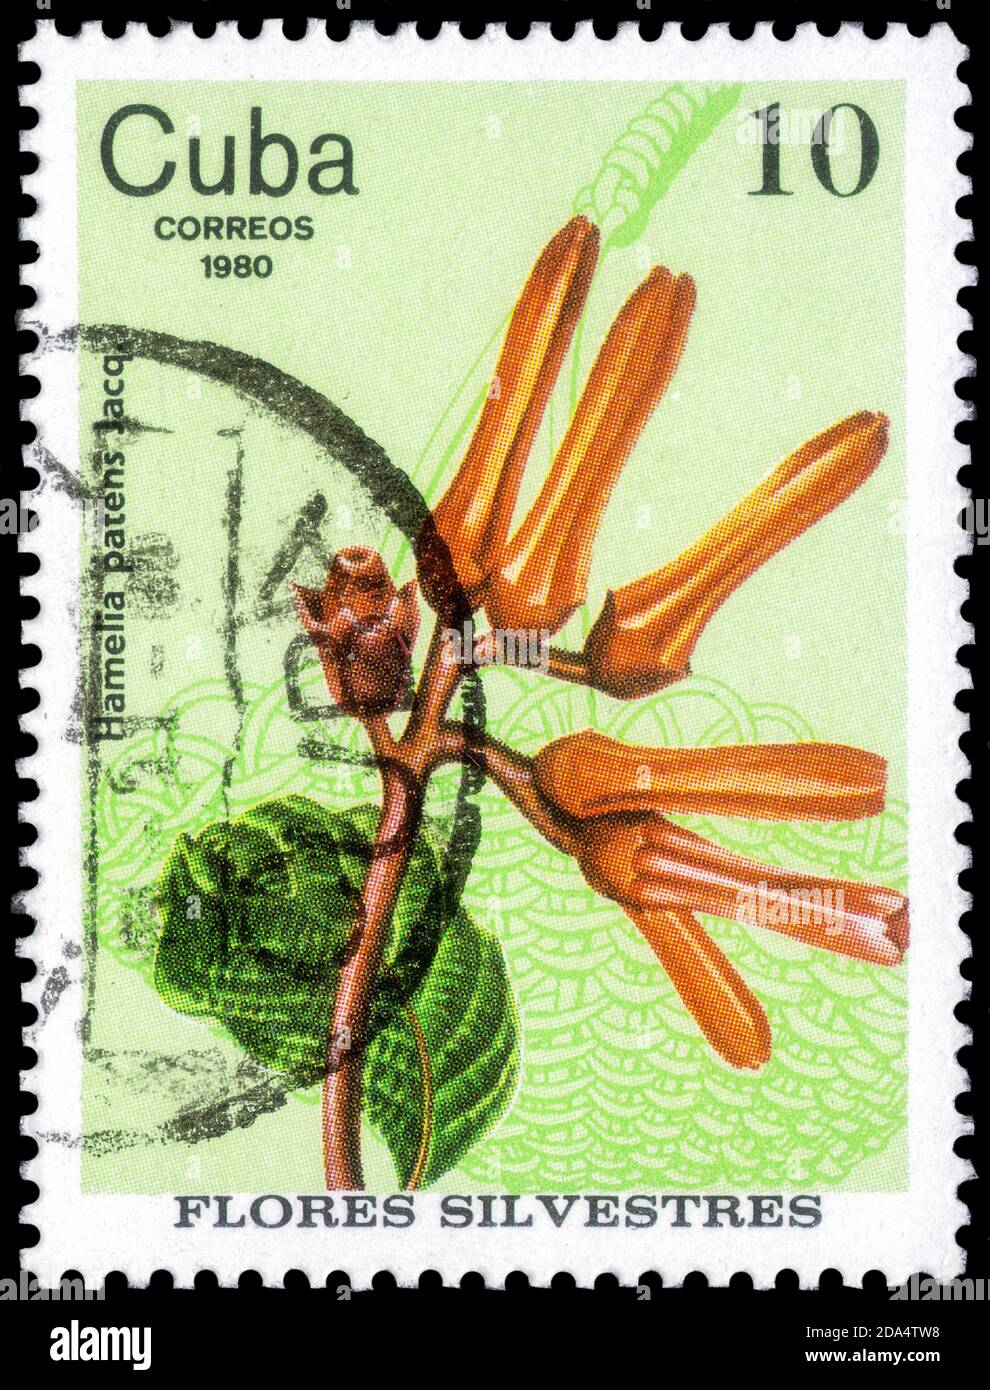 Saint Petersburg, Russia - September 18, 2020: Stamp printed in the Cuba the image of the Hamelia patens, circa 1980 Stock Photo